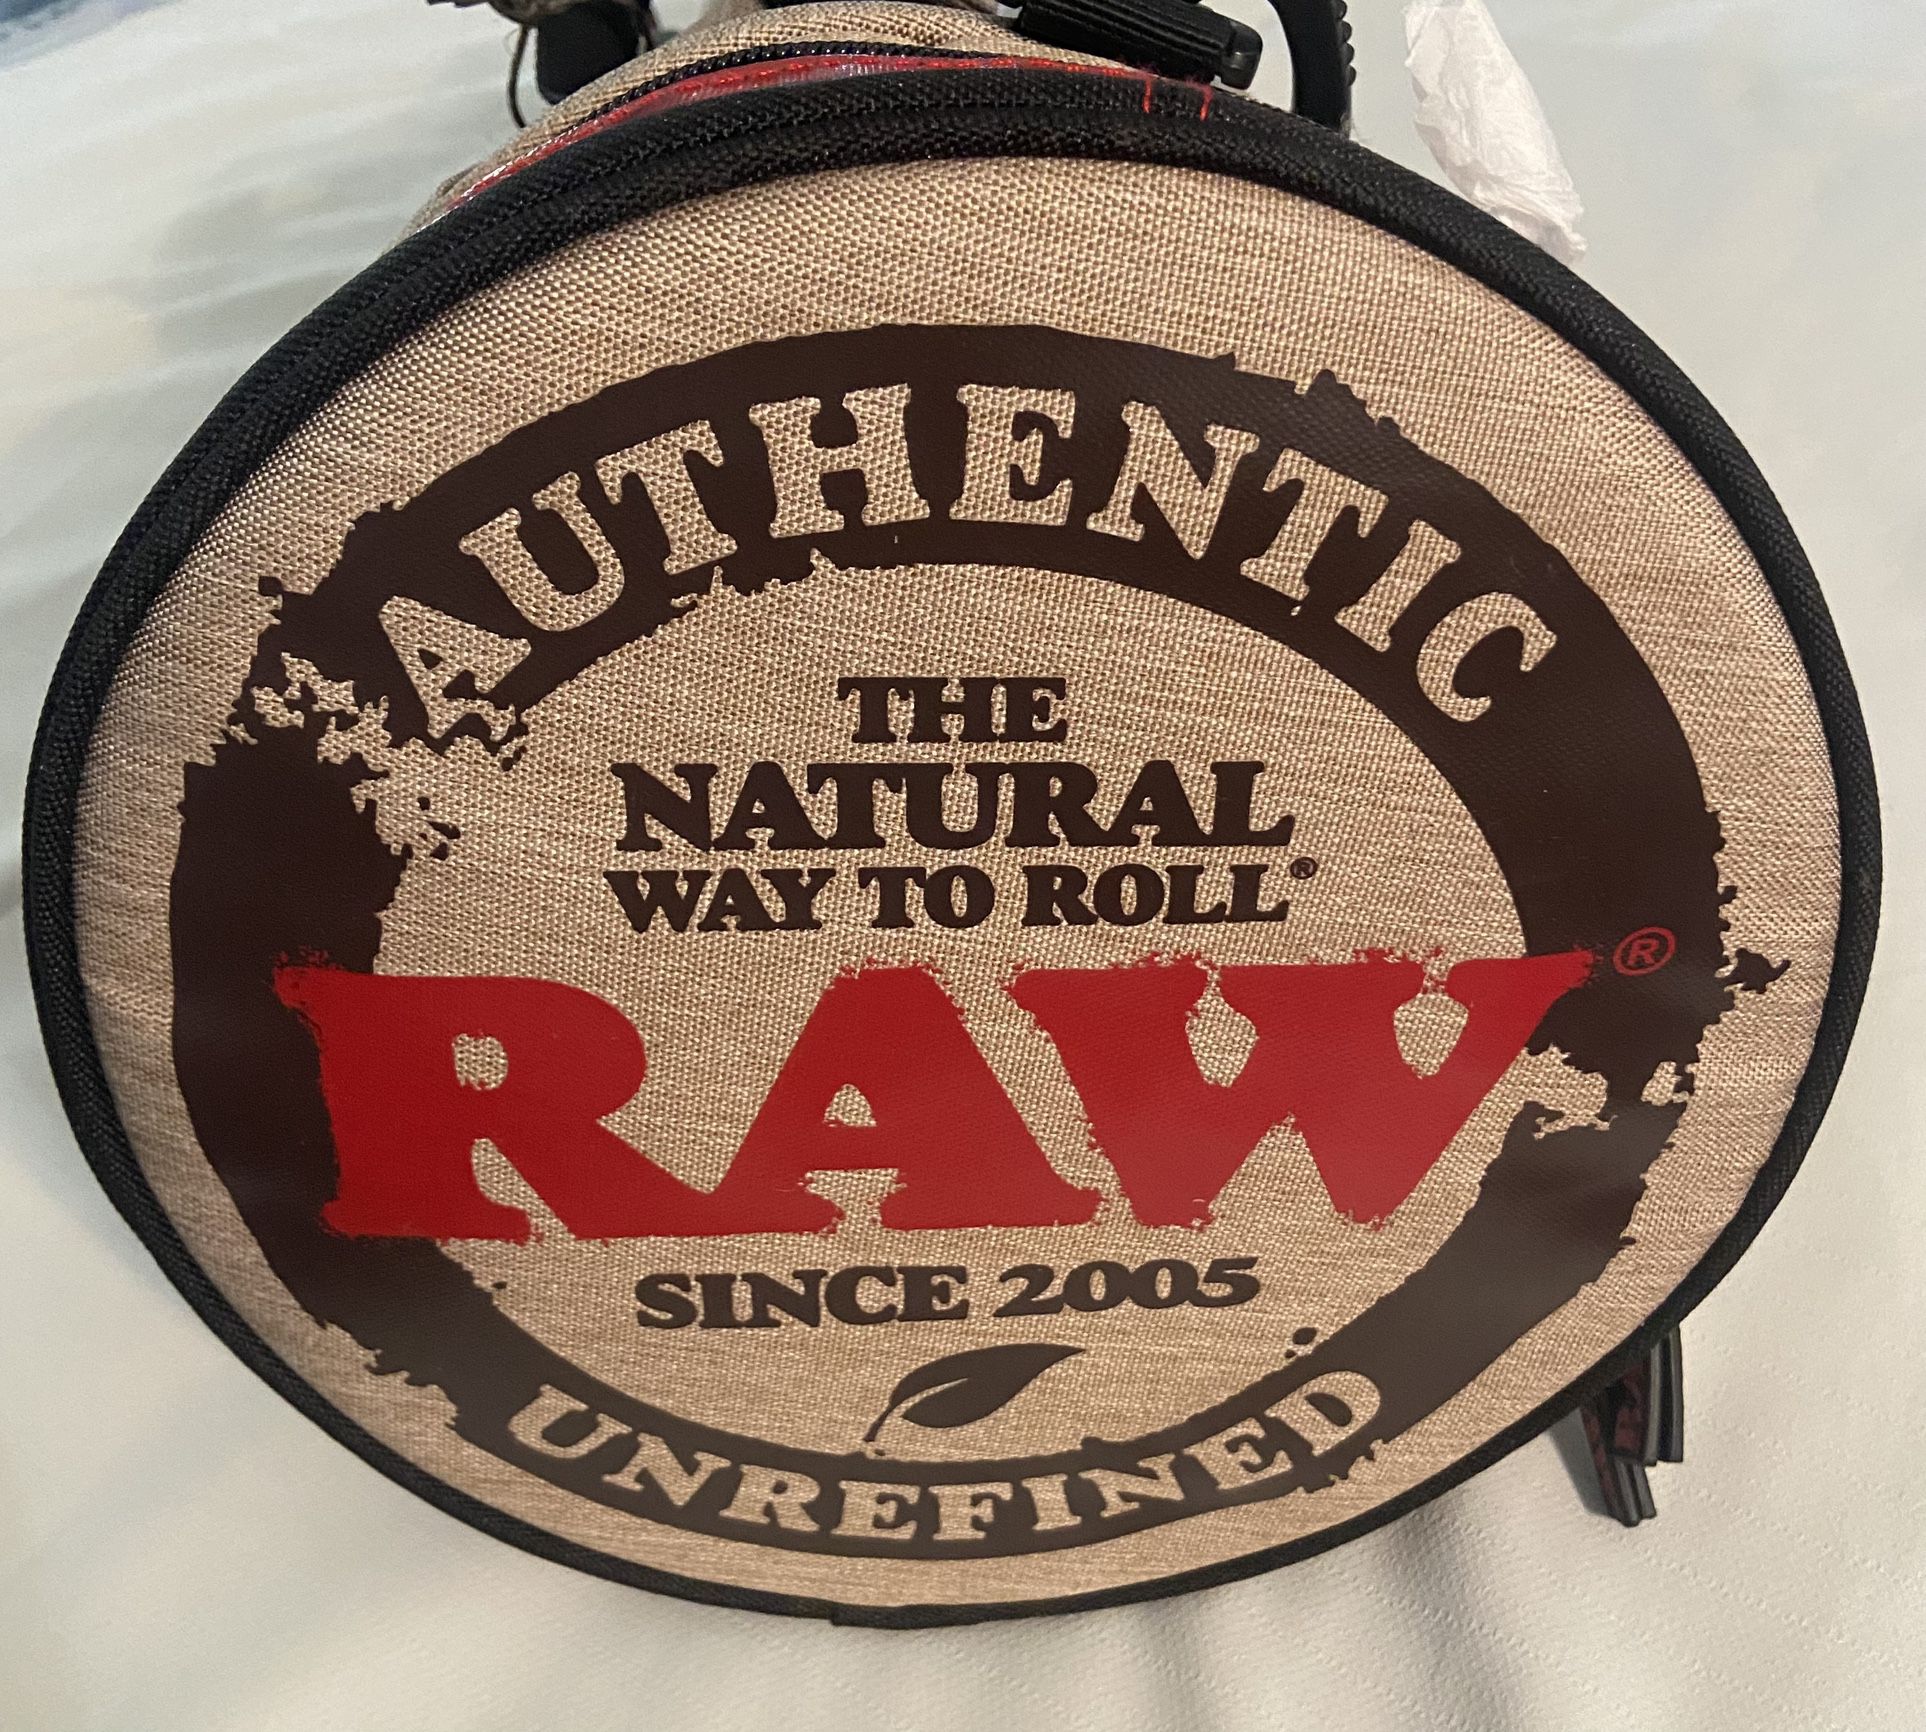 Raw Rolling Papers Cone Duffel Bag